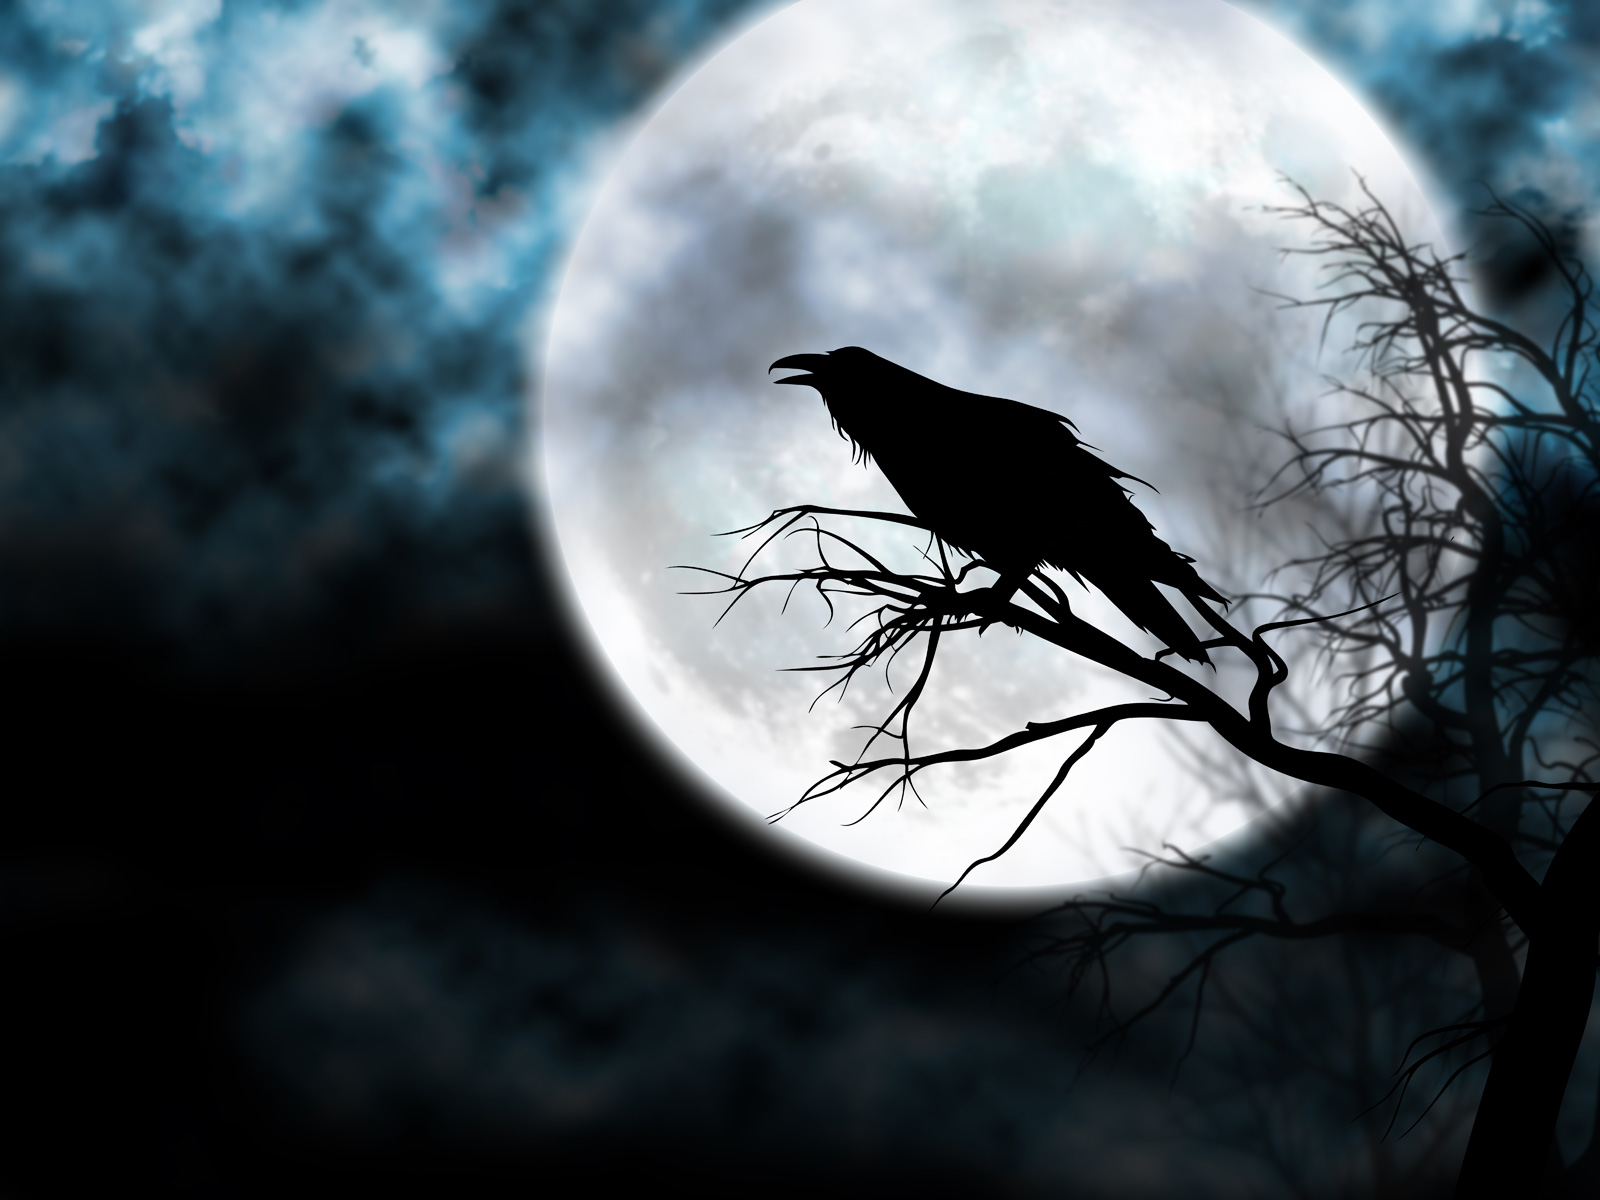 Raven at the night sky